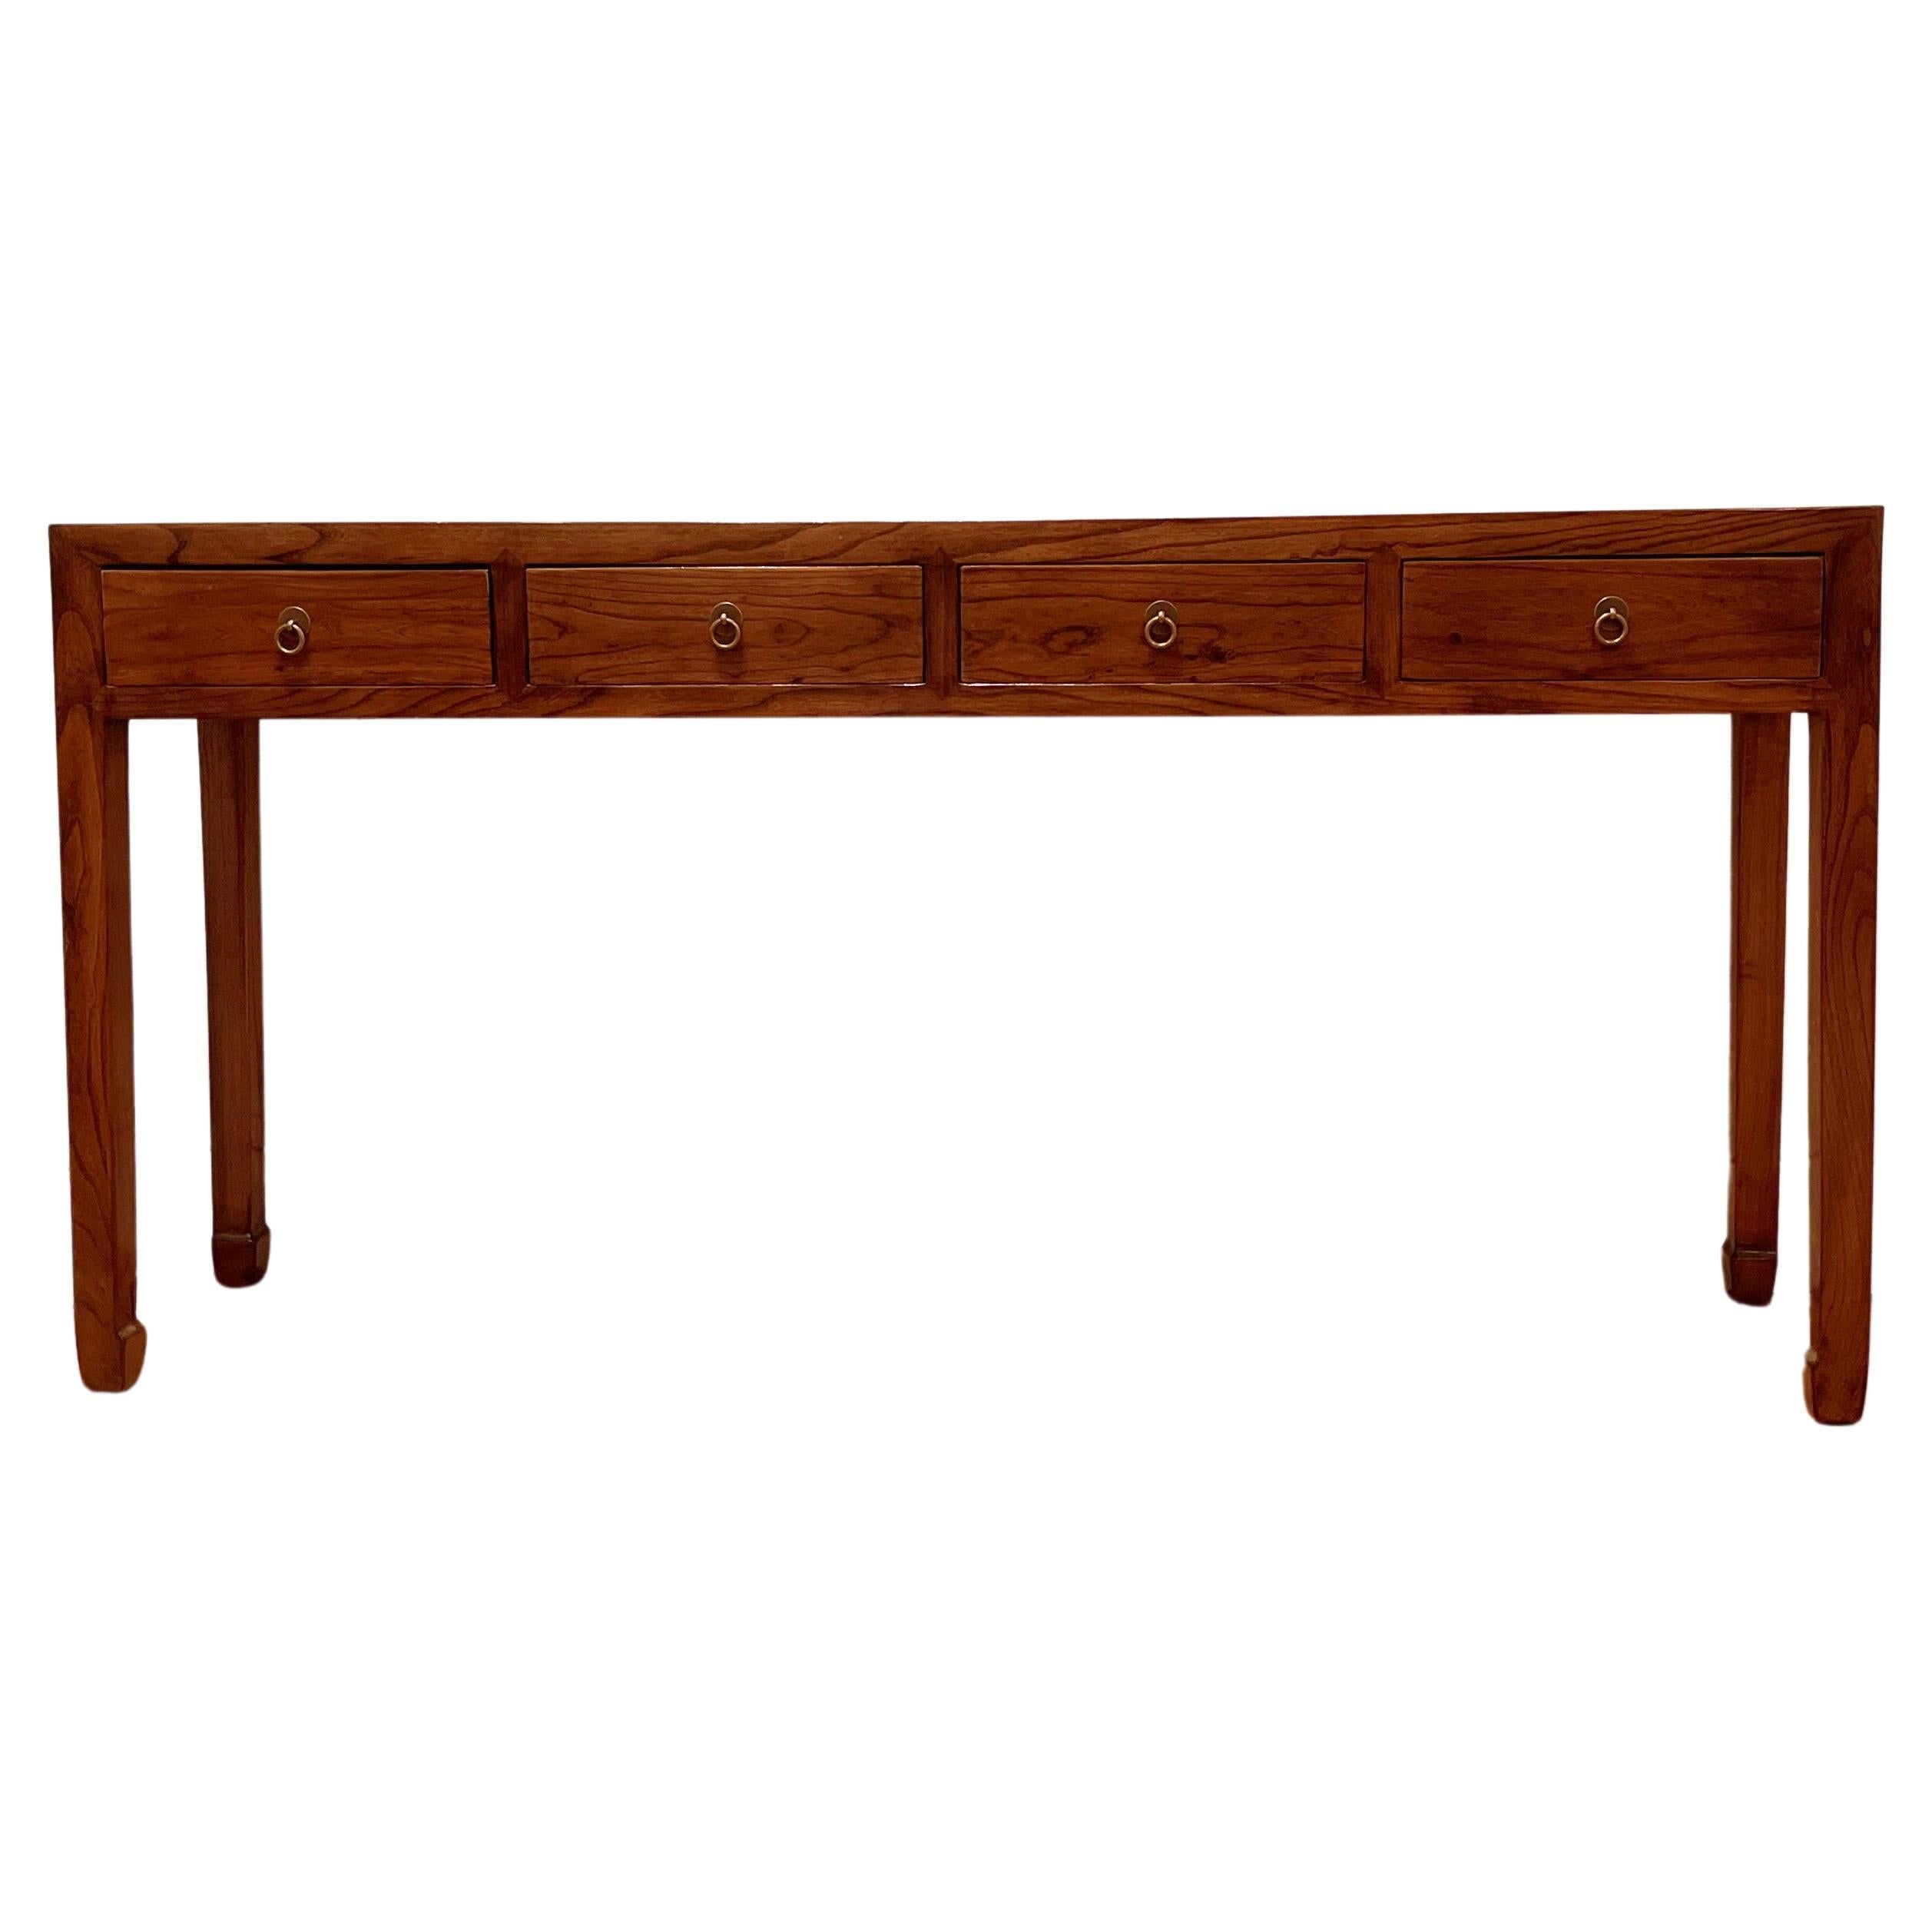 Fine Jumu Console Table with Drawers For Sale